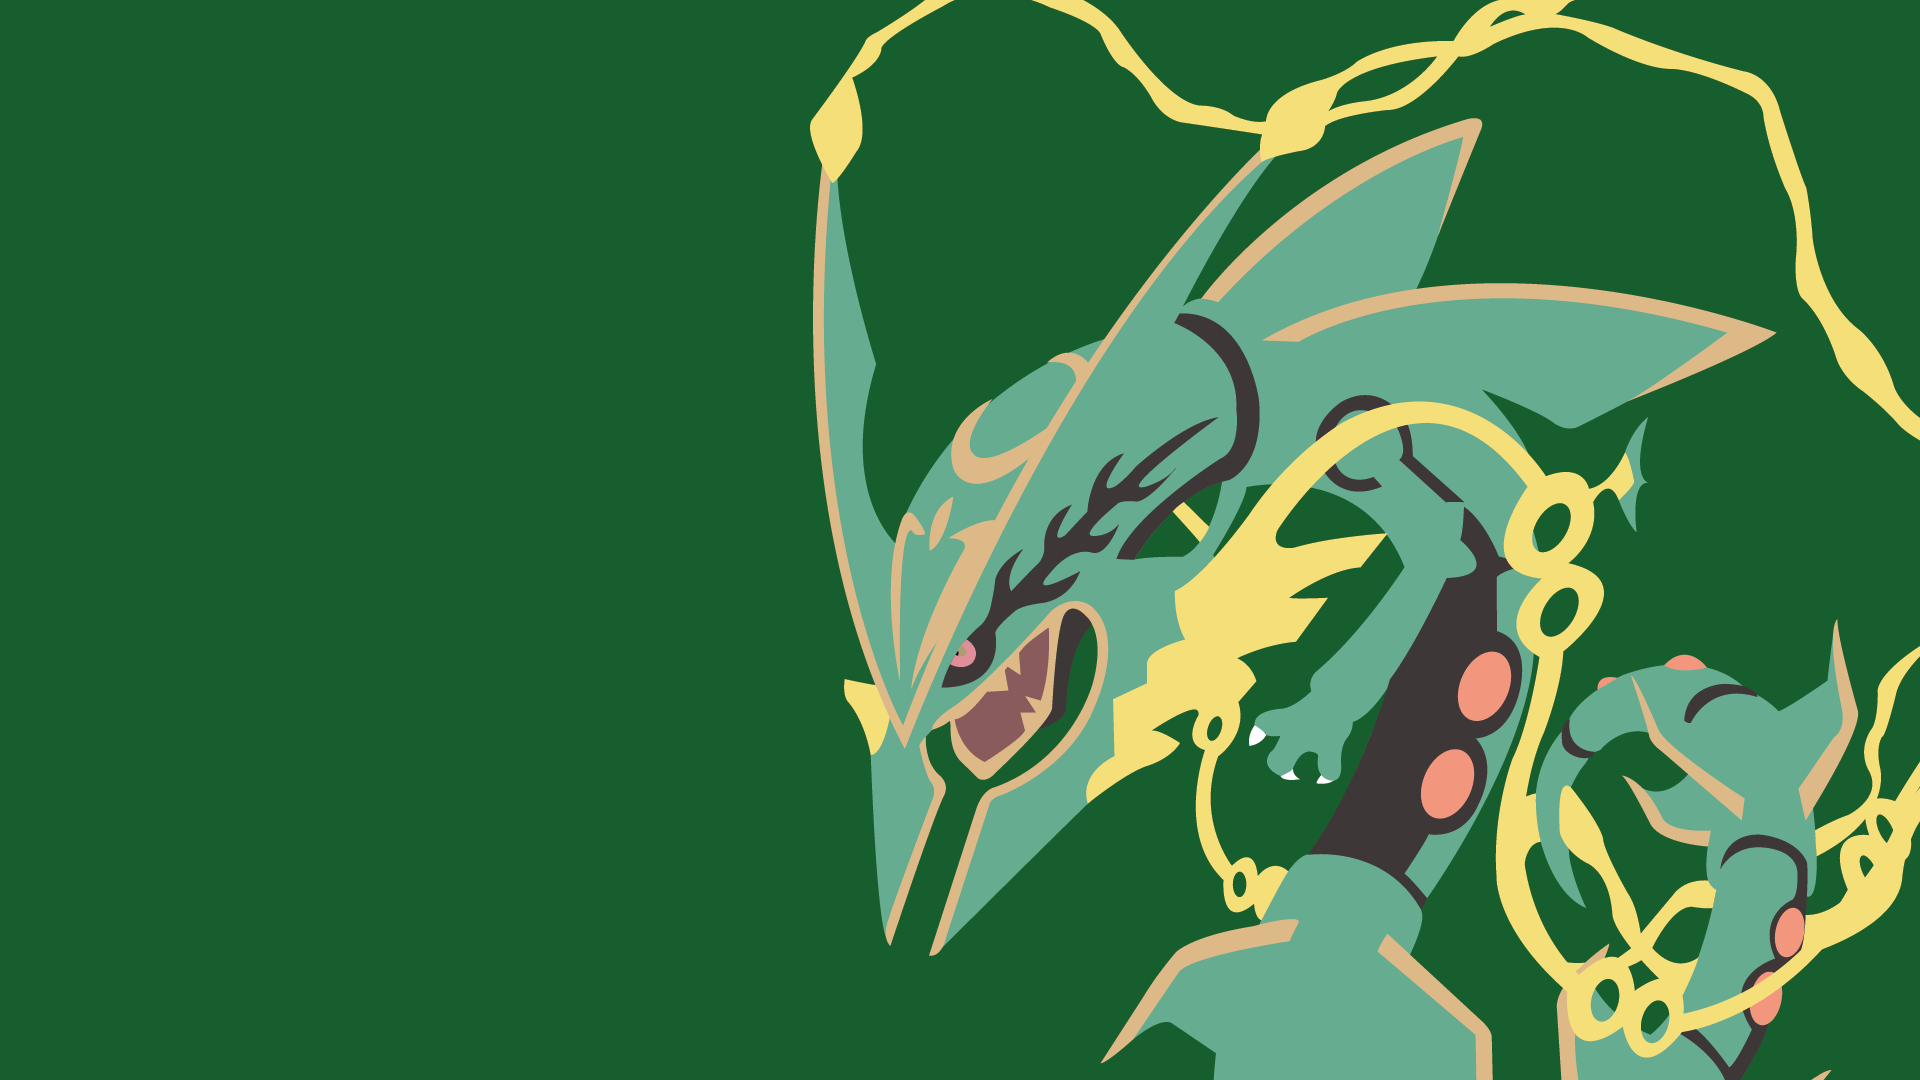 Rayquaza HD Wallpapers - Wallpaper Cave.